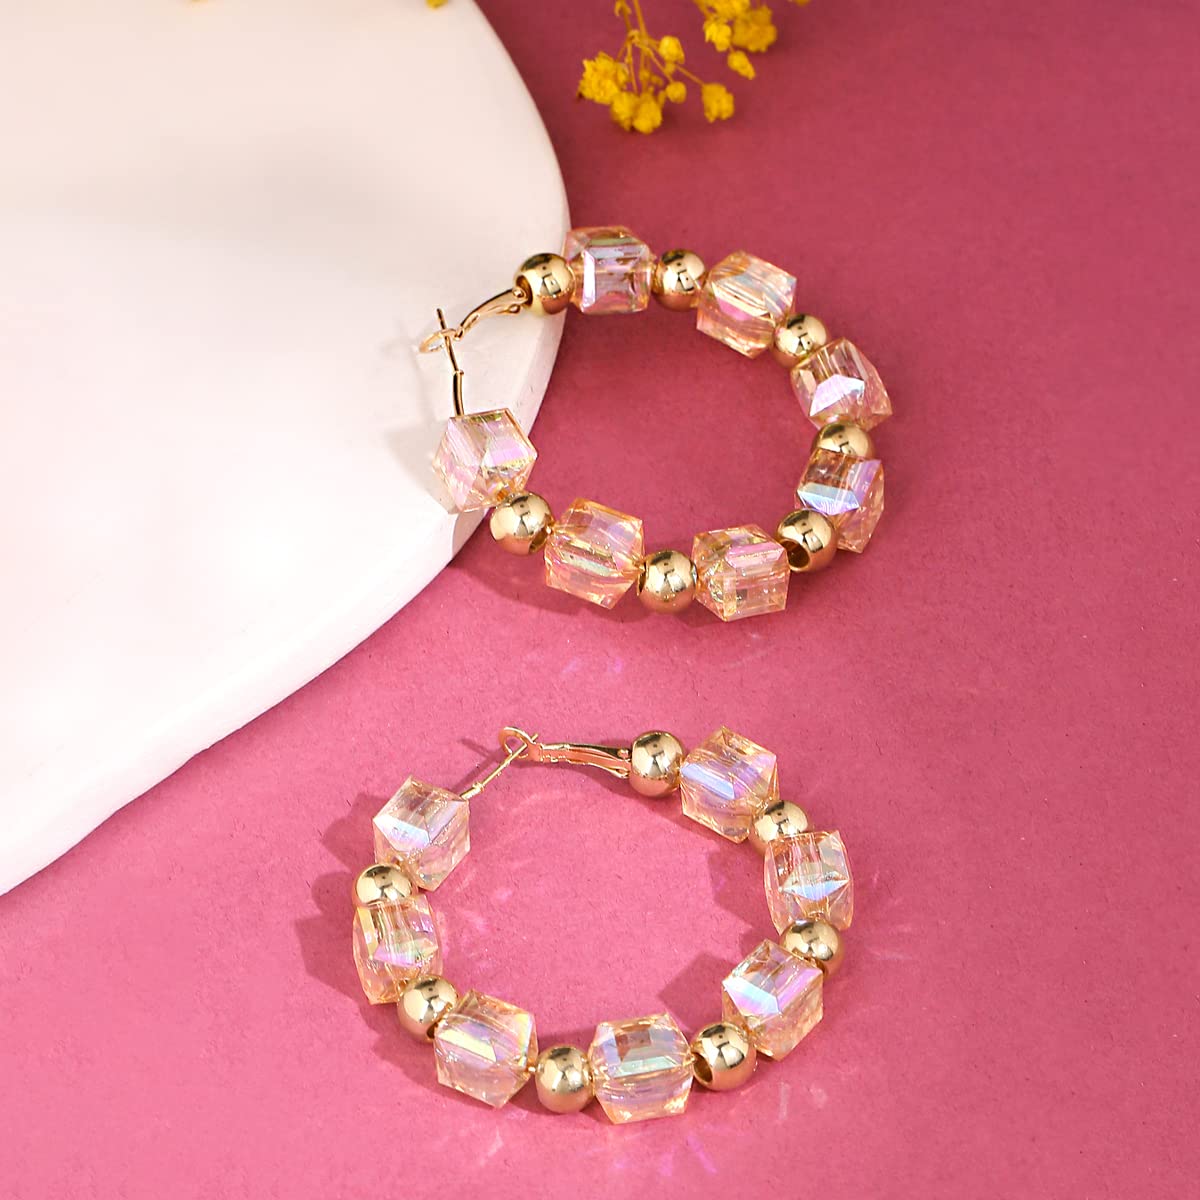 Yellow Chimes Earrings For Women Gold Tone Pink Crystal Studded Hoop For Women and Girls